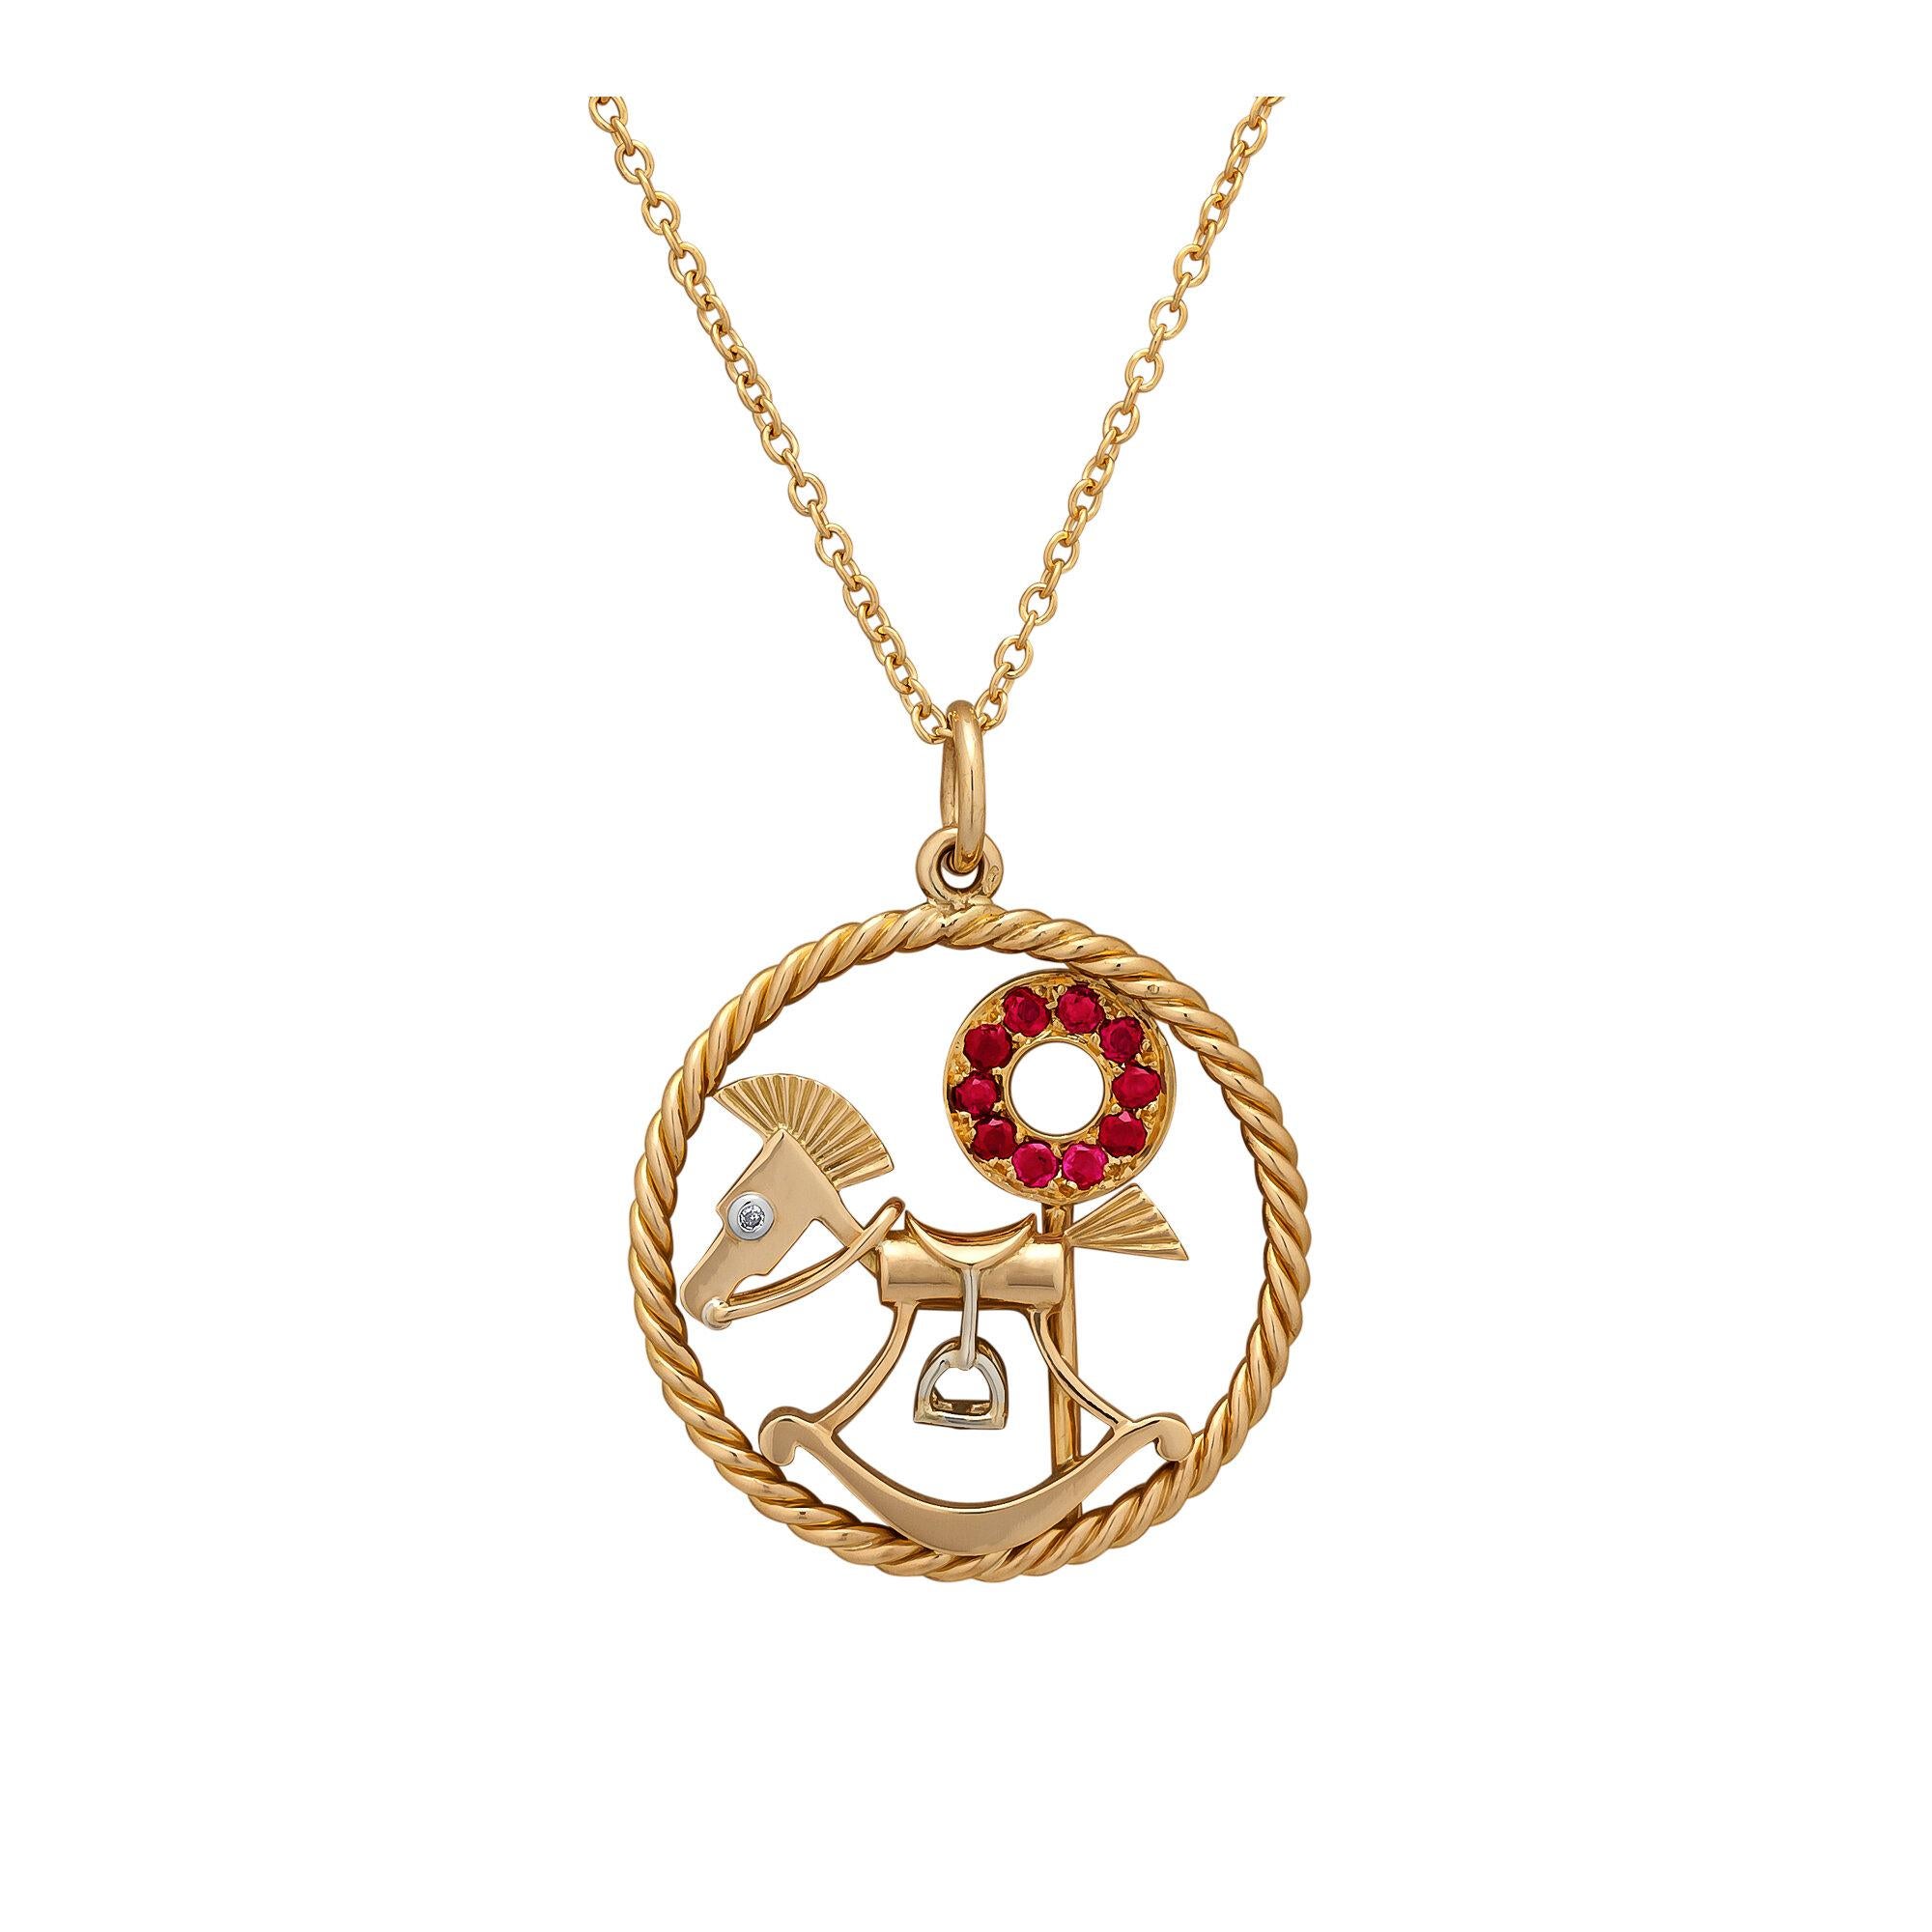 Keep calm and rock on with this Van Cleef & Arpels Paris mid-century diamond ruby gold rocking horse charm pendant.  Featuring a multi-dimensional diamond eyed rocking horse and a ruby flavored lollipop, this circa 1955 charm has a twisted circular